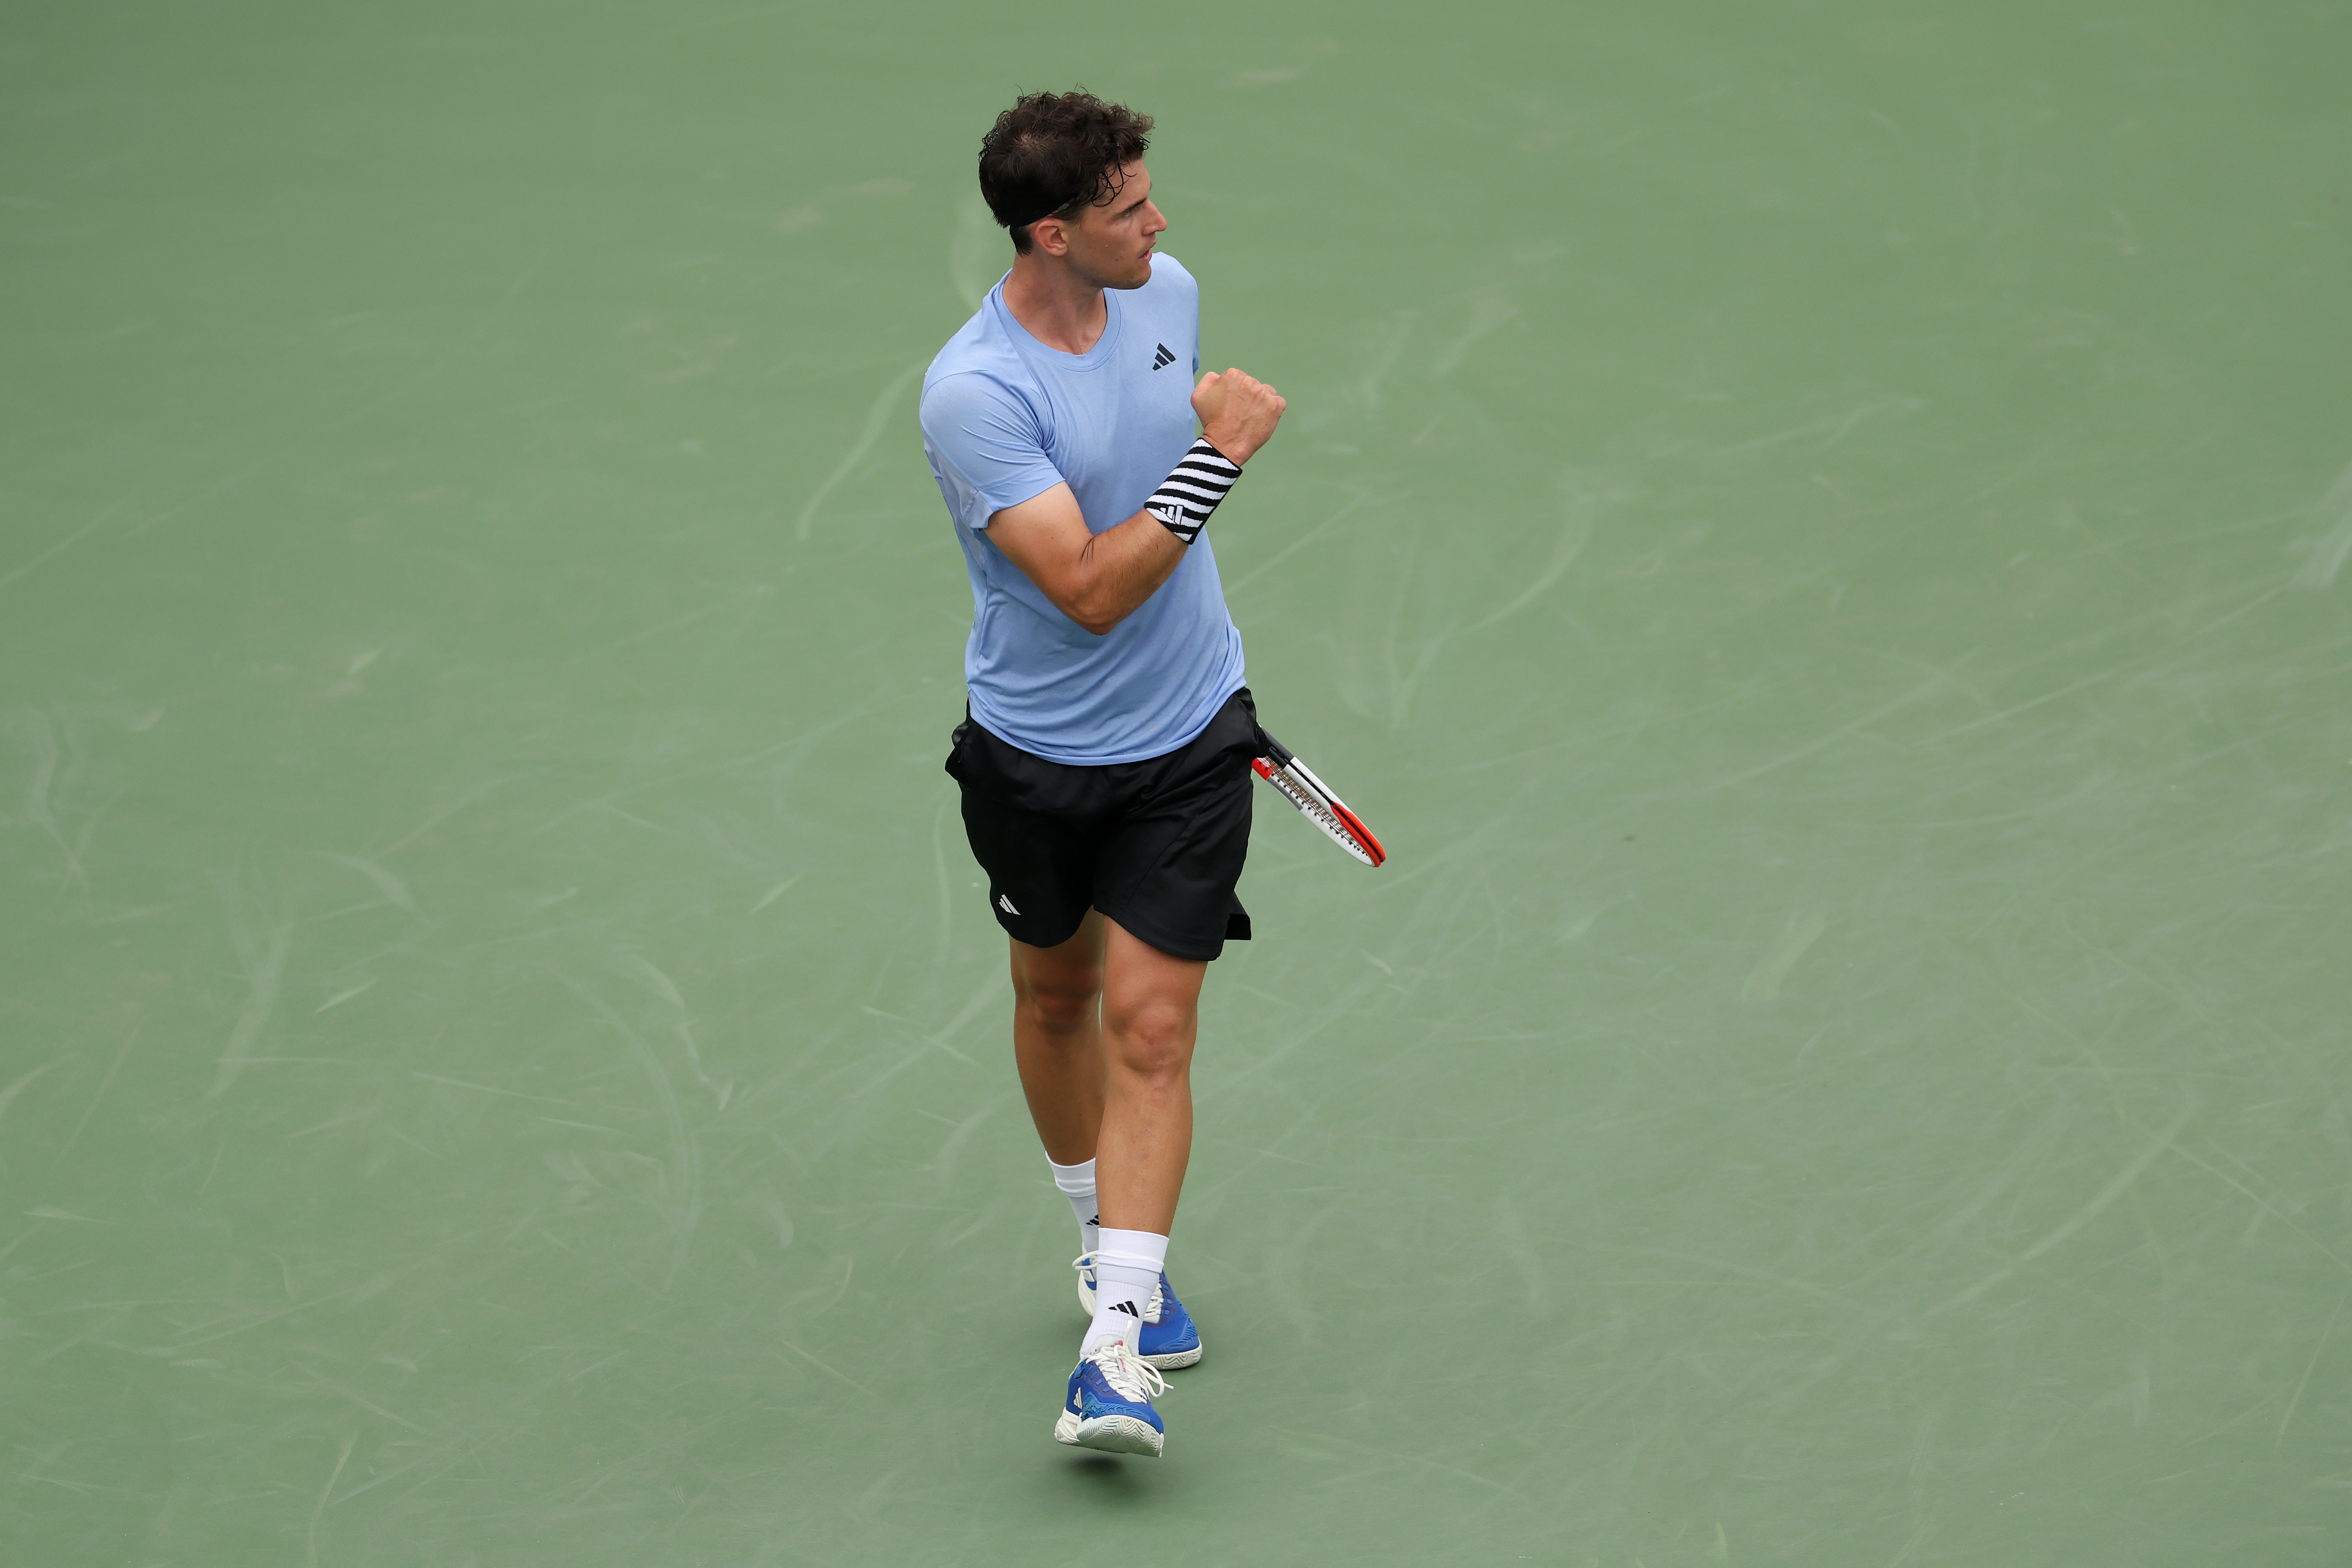 Dominic Thiem wins first US Open match since 2020 final, snapping seven-match losing streak at Slams